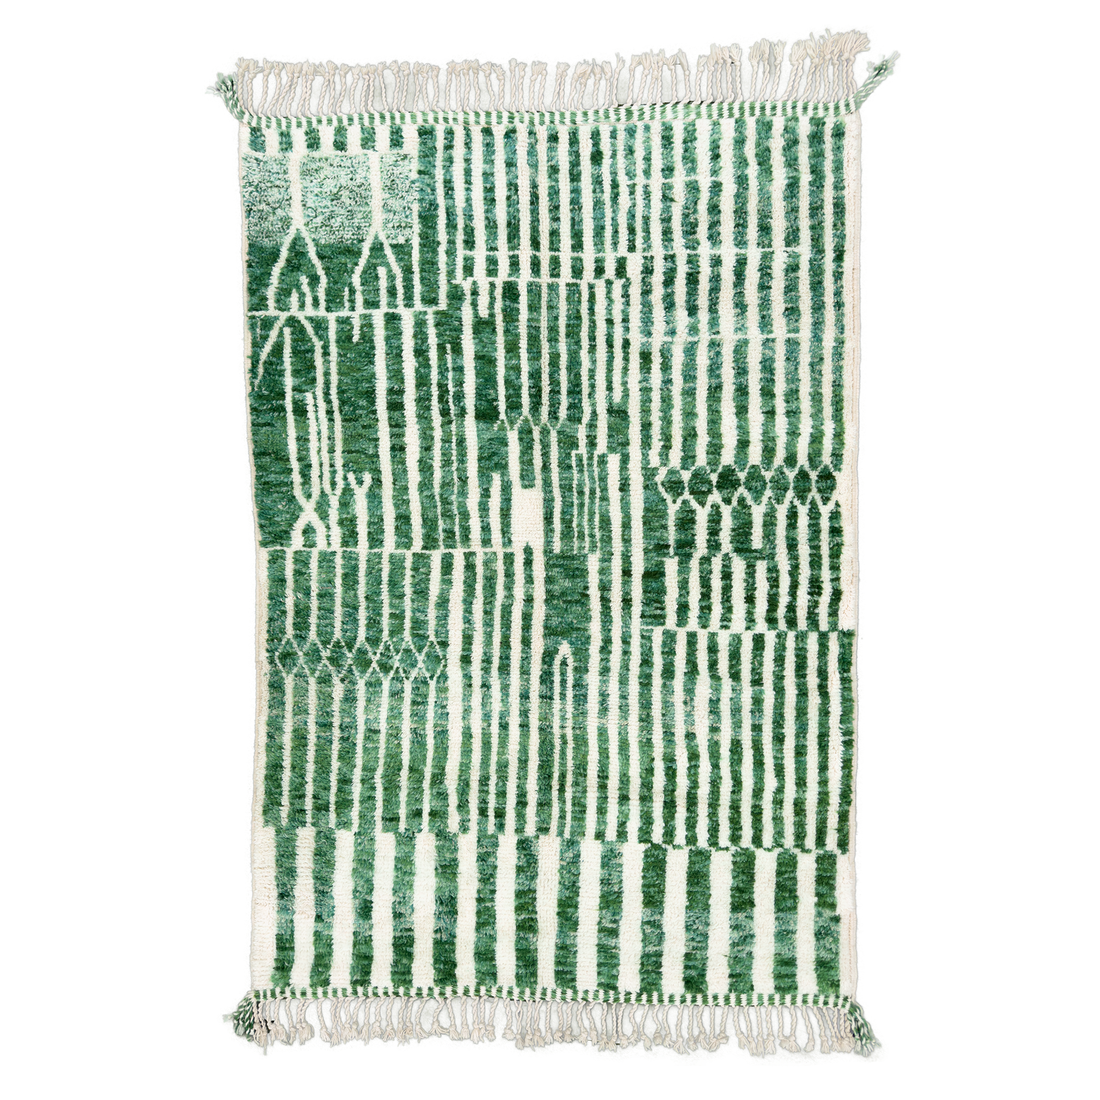 The depth of green shades in this rug is what gives this rug its personality. The variation of the linework width makes for a rug that has alot of depth, even for just having two colors. The abrash green depicts a range of shades of green. The thick knots and ½” medium pile give for a fabulous feel to the touch.